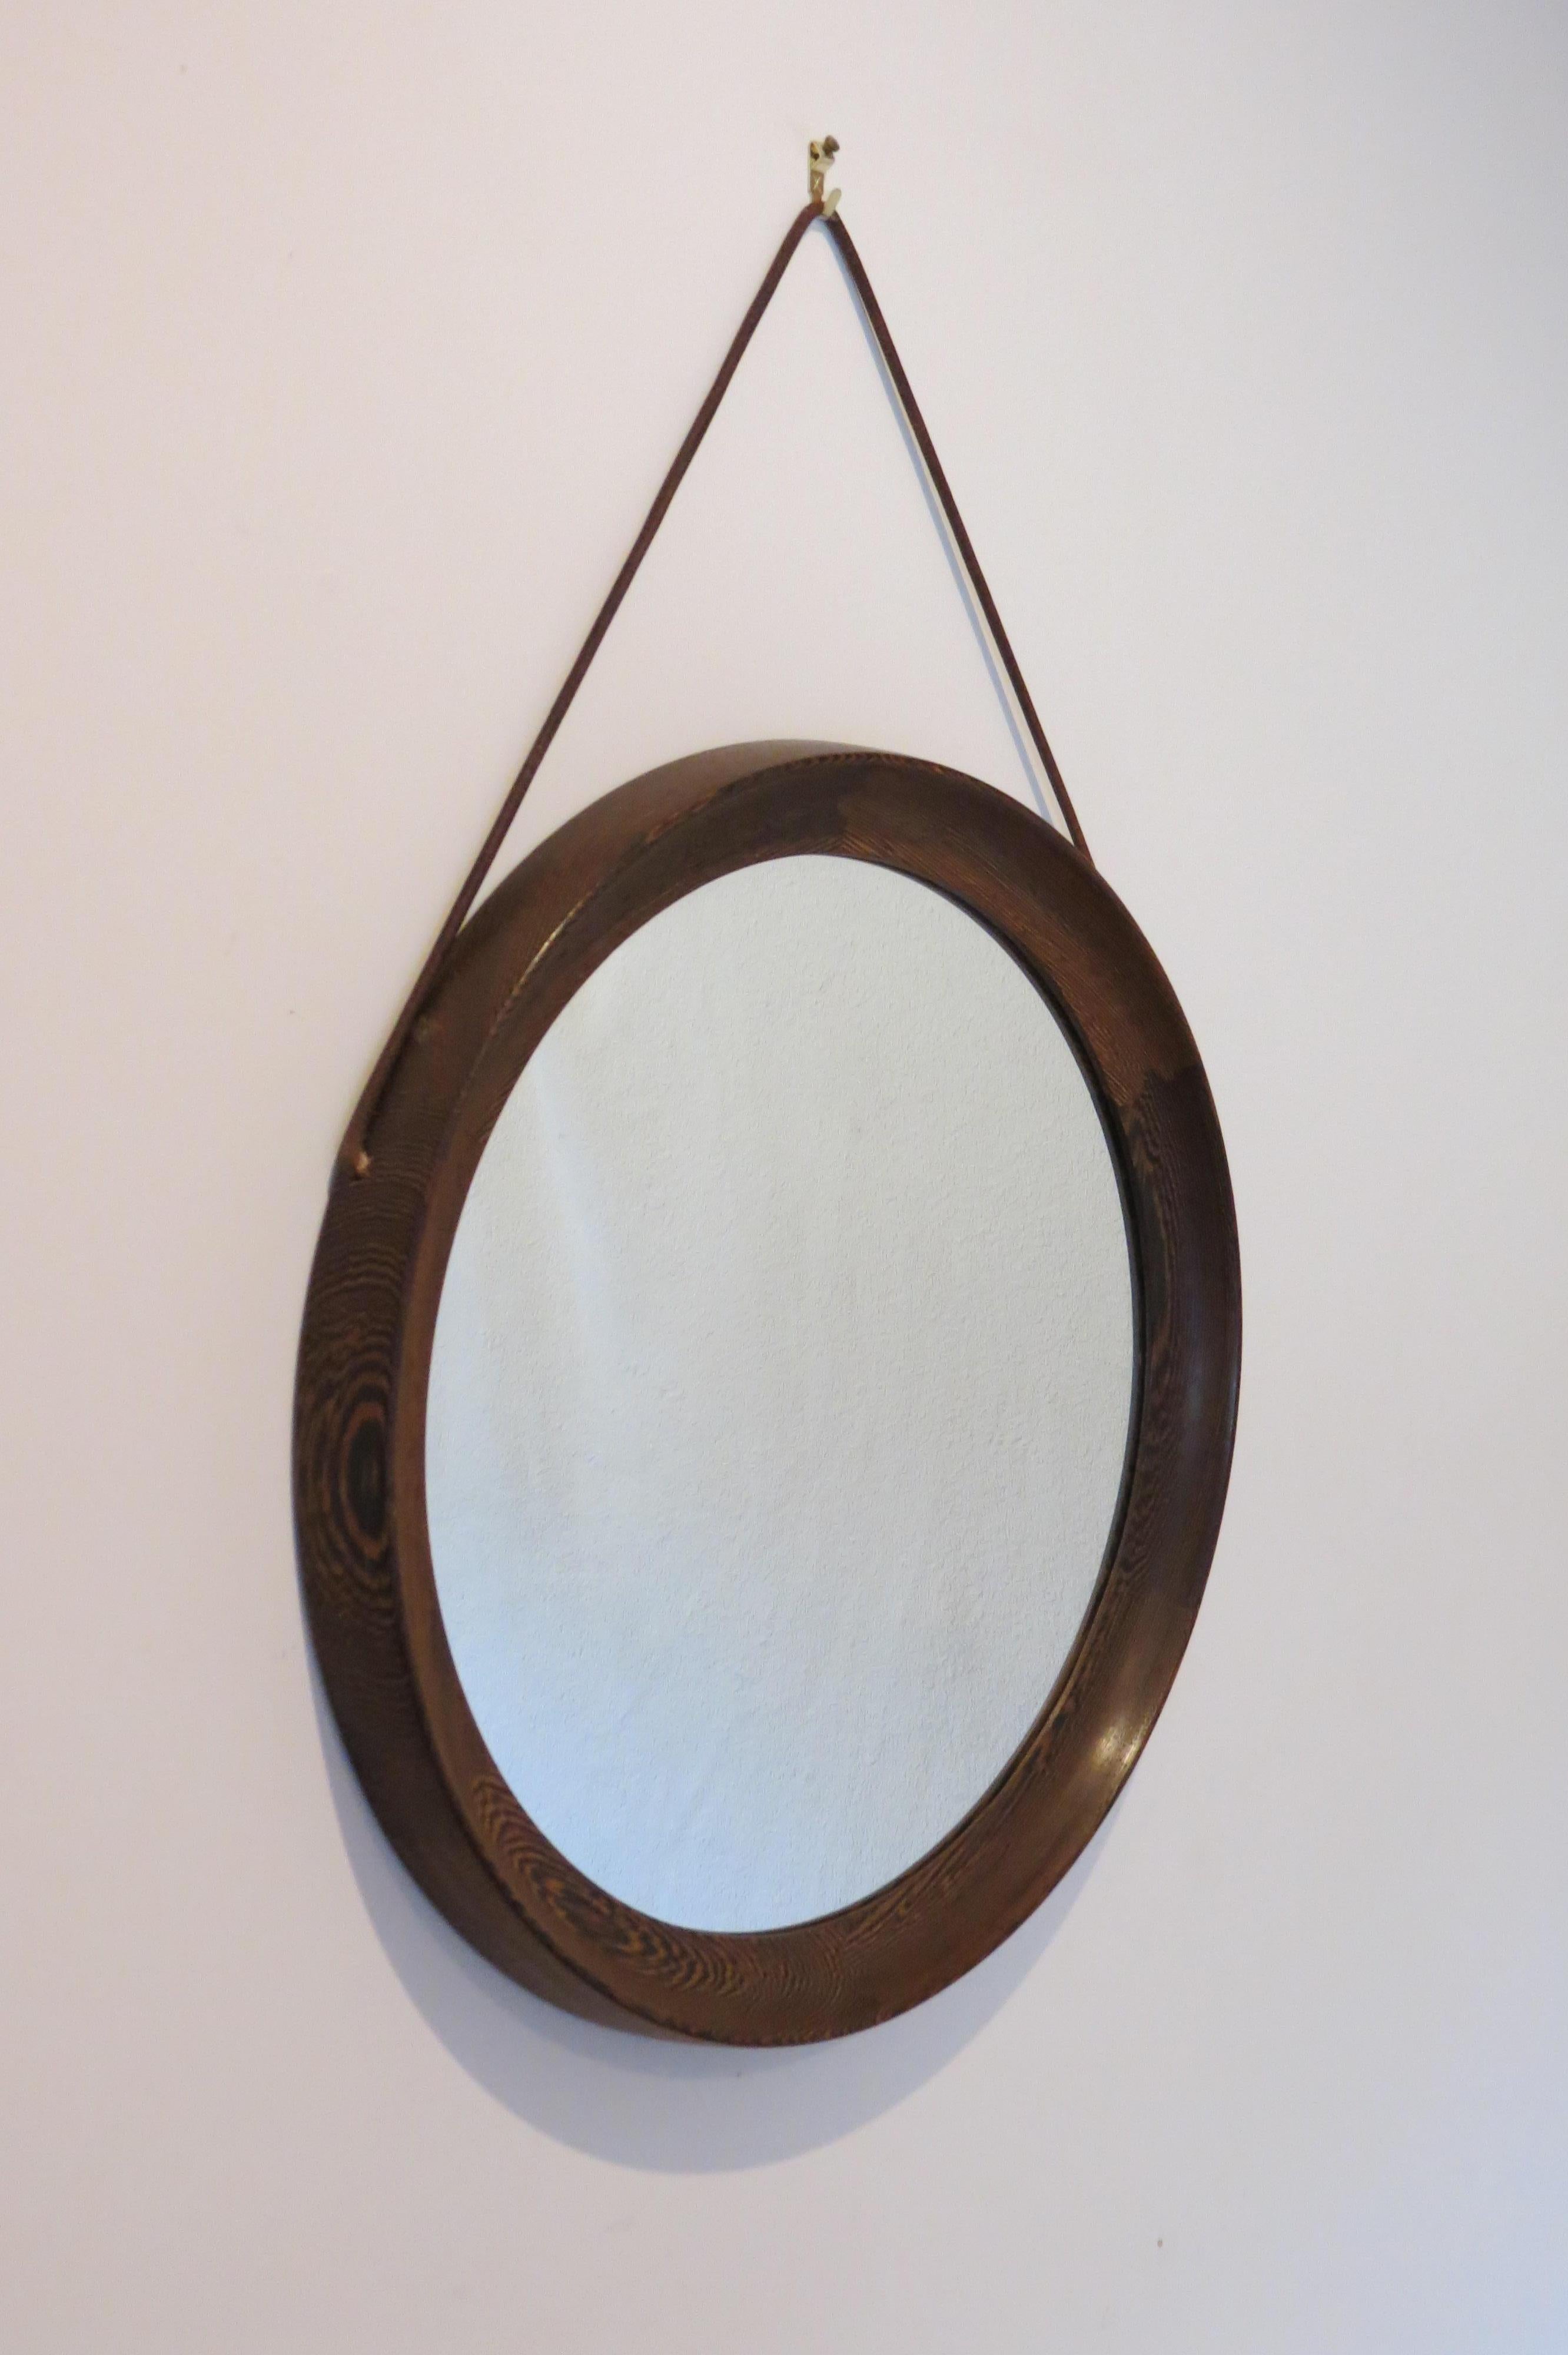 Swedish circular wall hanging mirror by Uno & Östen Kristiansson and manufactured by Luxus, Sweden.

Solid Wengé with detailed joints, glass mirror plate and leather strap.

Good vintage condition.

ST732.